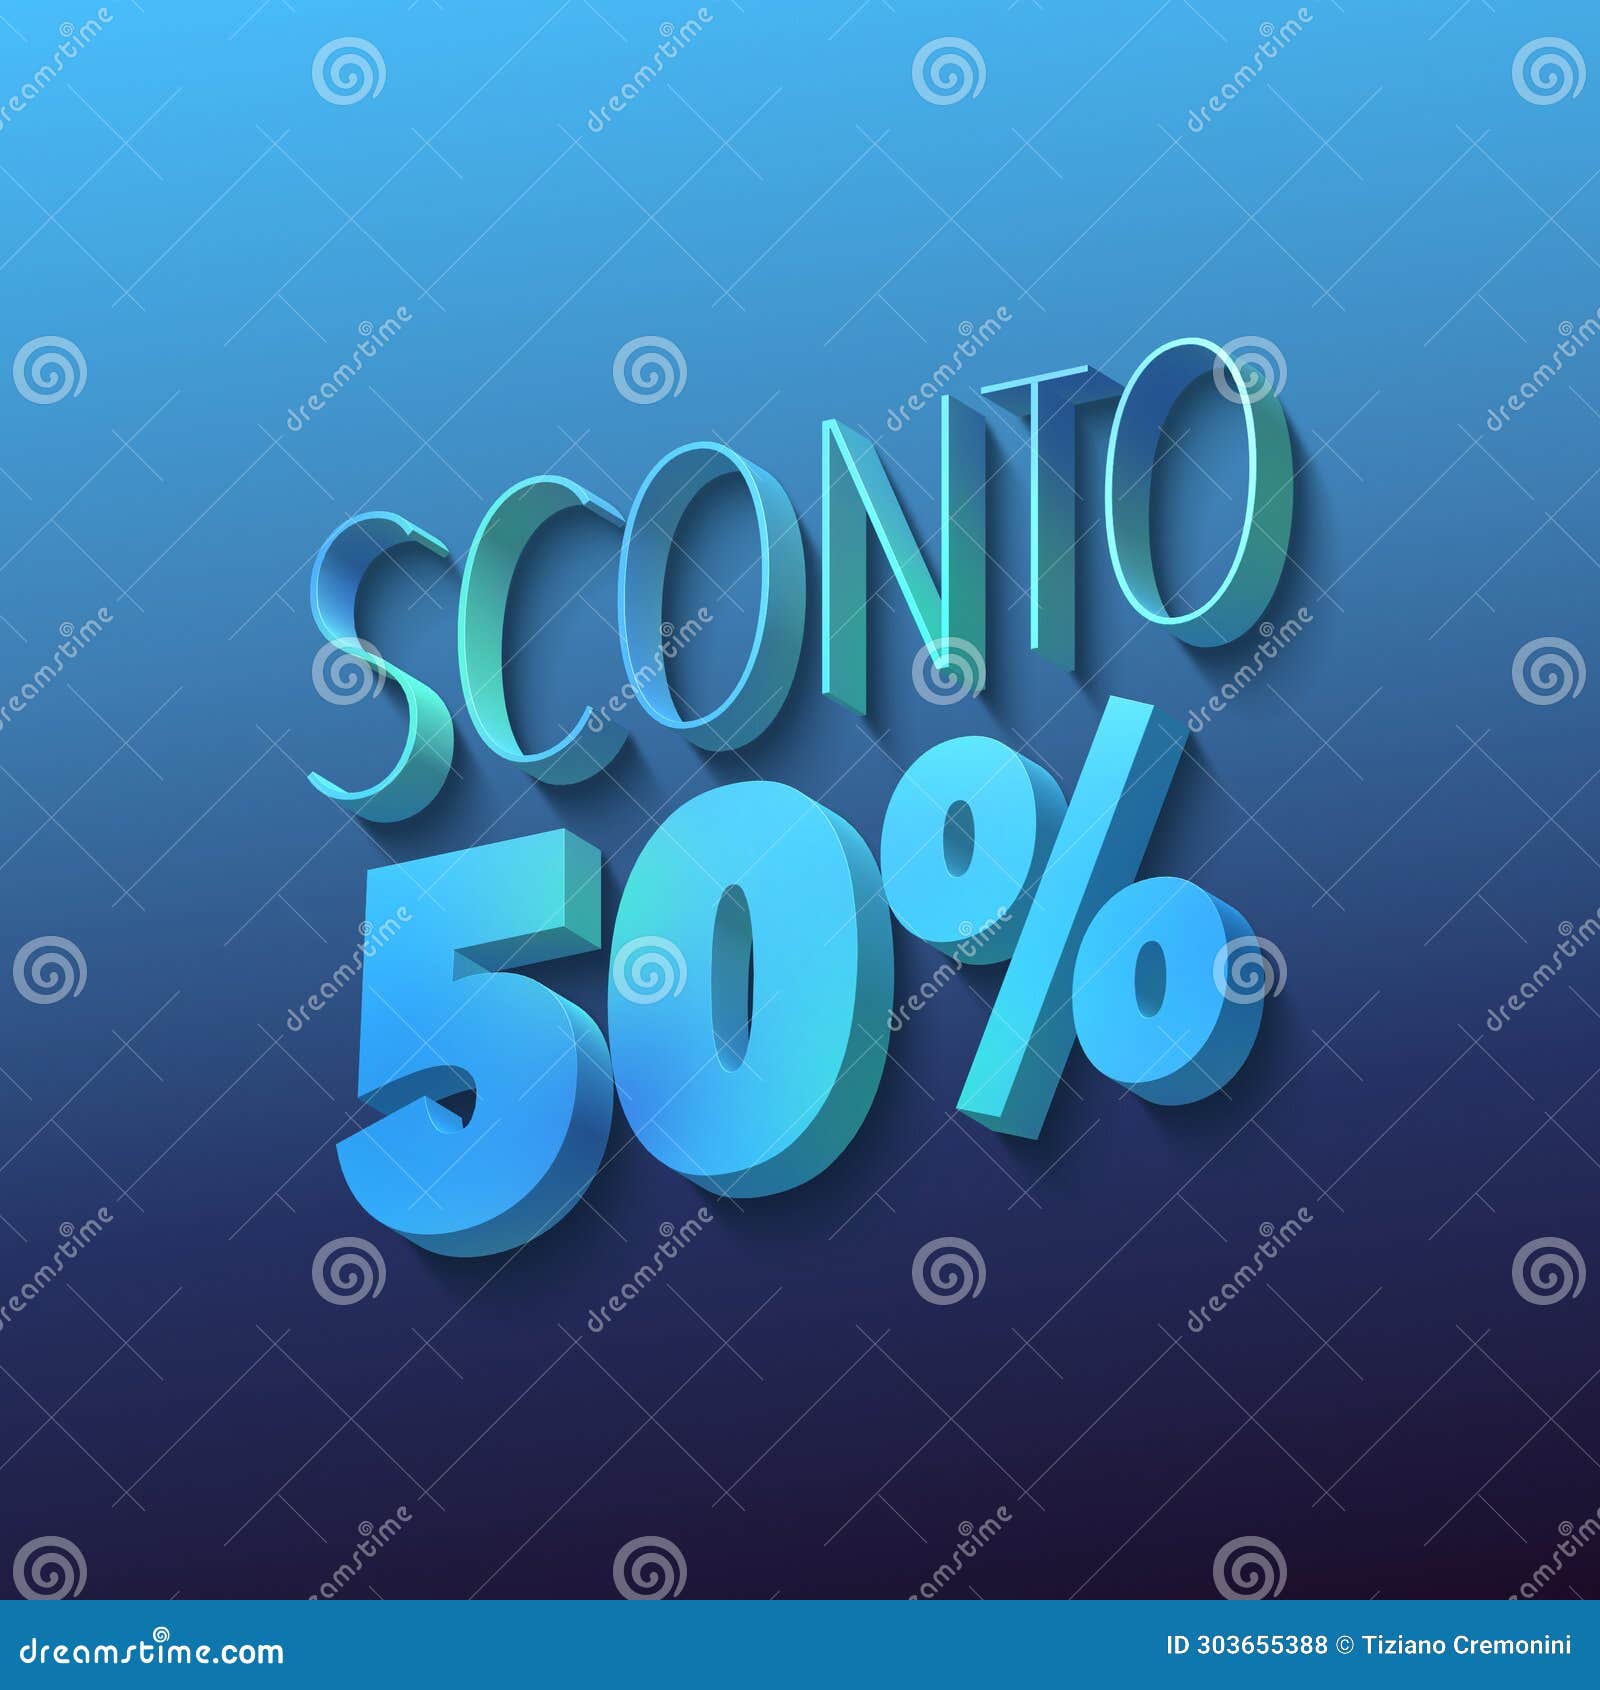 sconto 50%, italian words for 50 percent off, blue 3d letters on dark blue background, 3d rendering